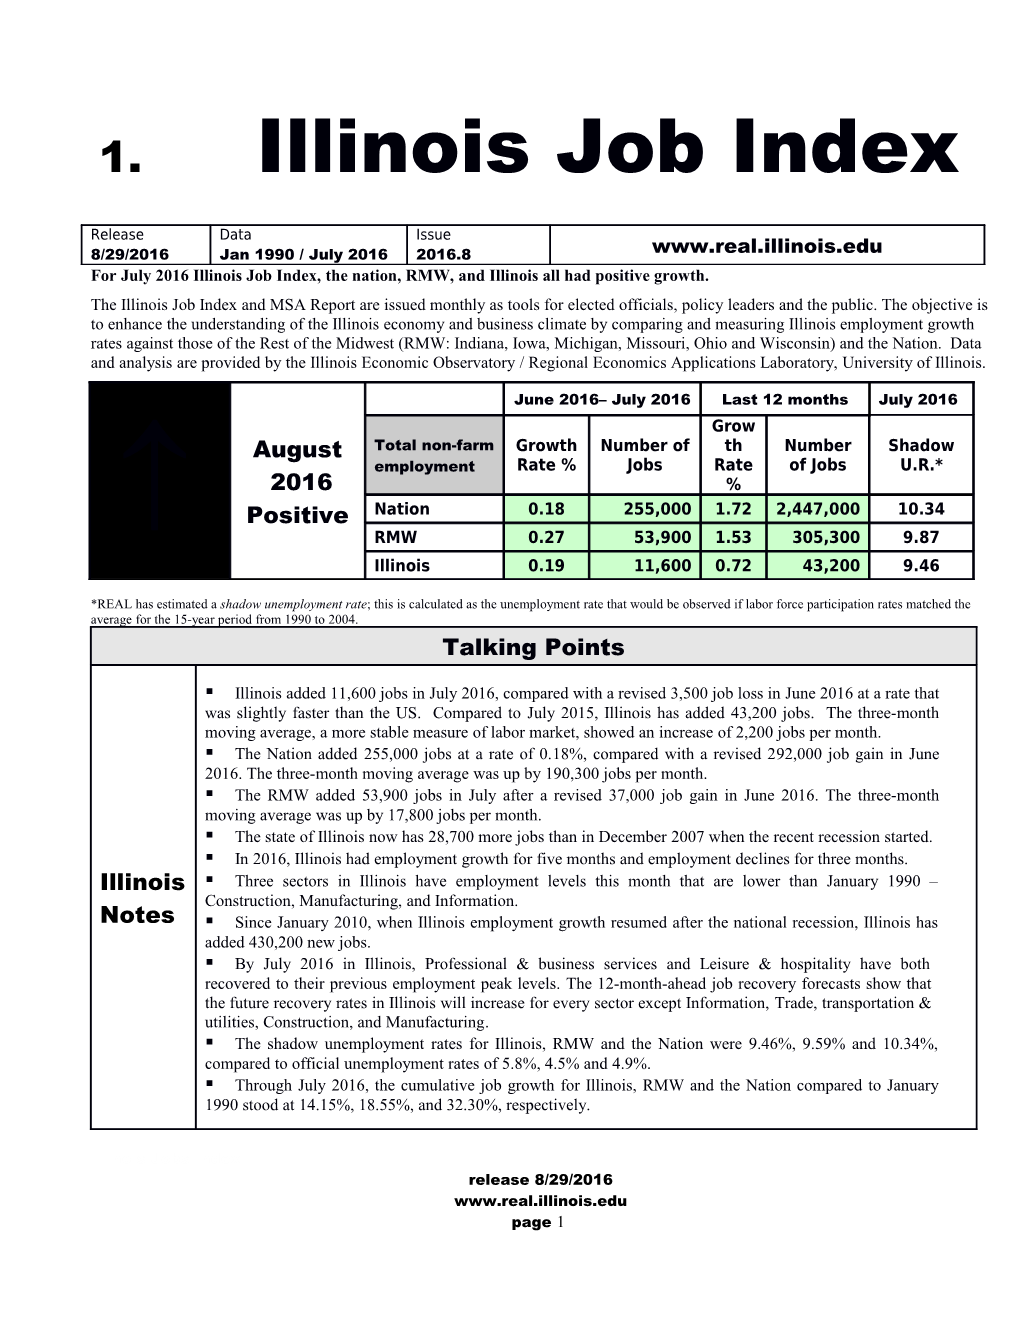 Forjuly 2016Illinois Job Index, the Nation, RMW, and Illinois Allhad Positive Growth